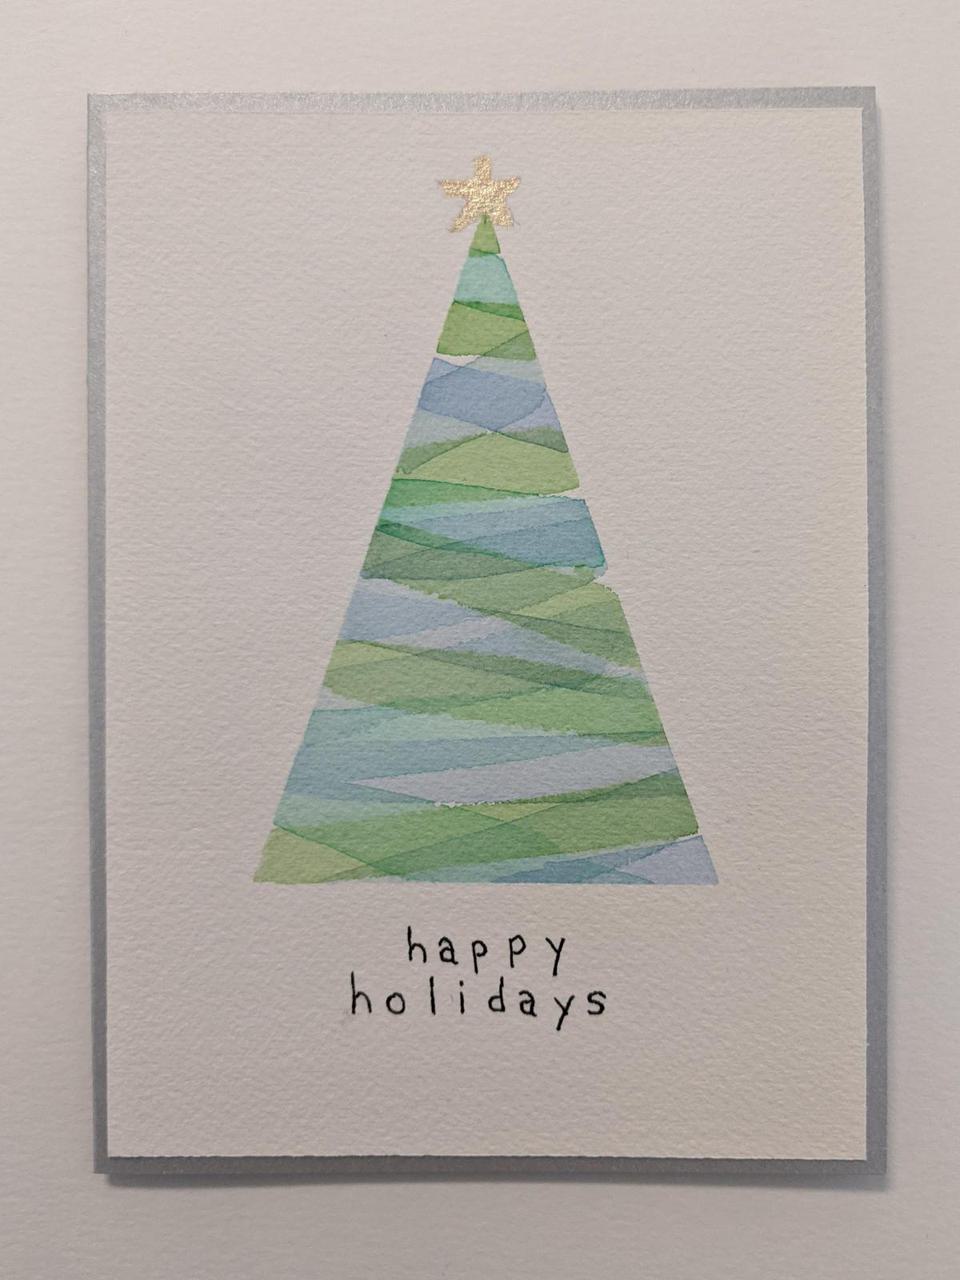 single triangle painted with stripes with a christmas star on the top.